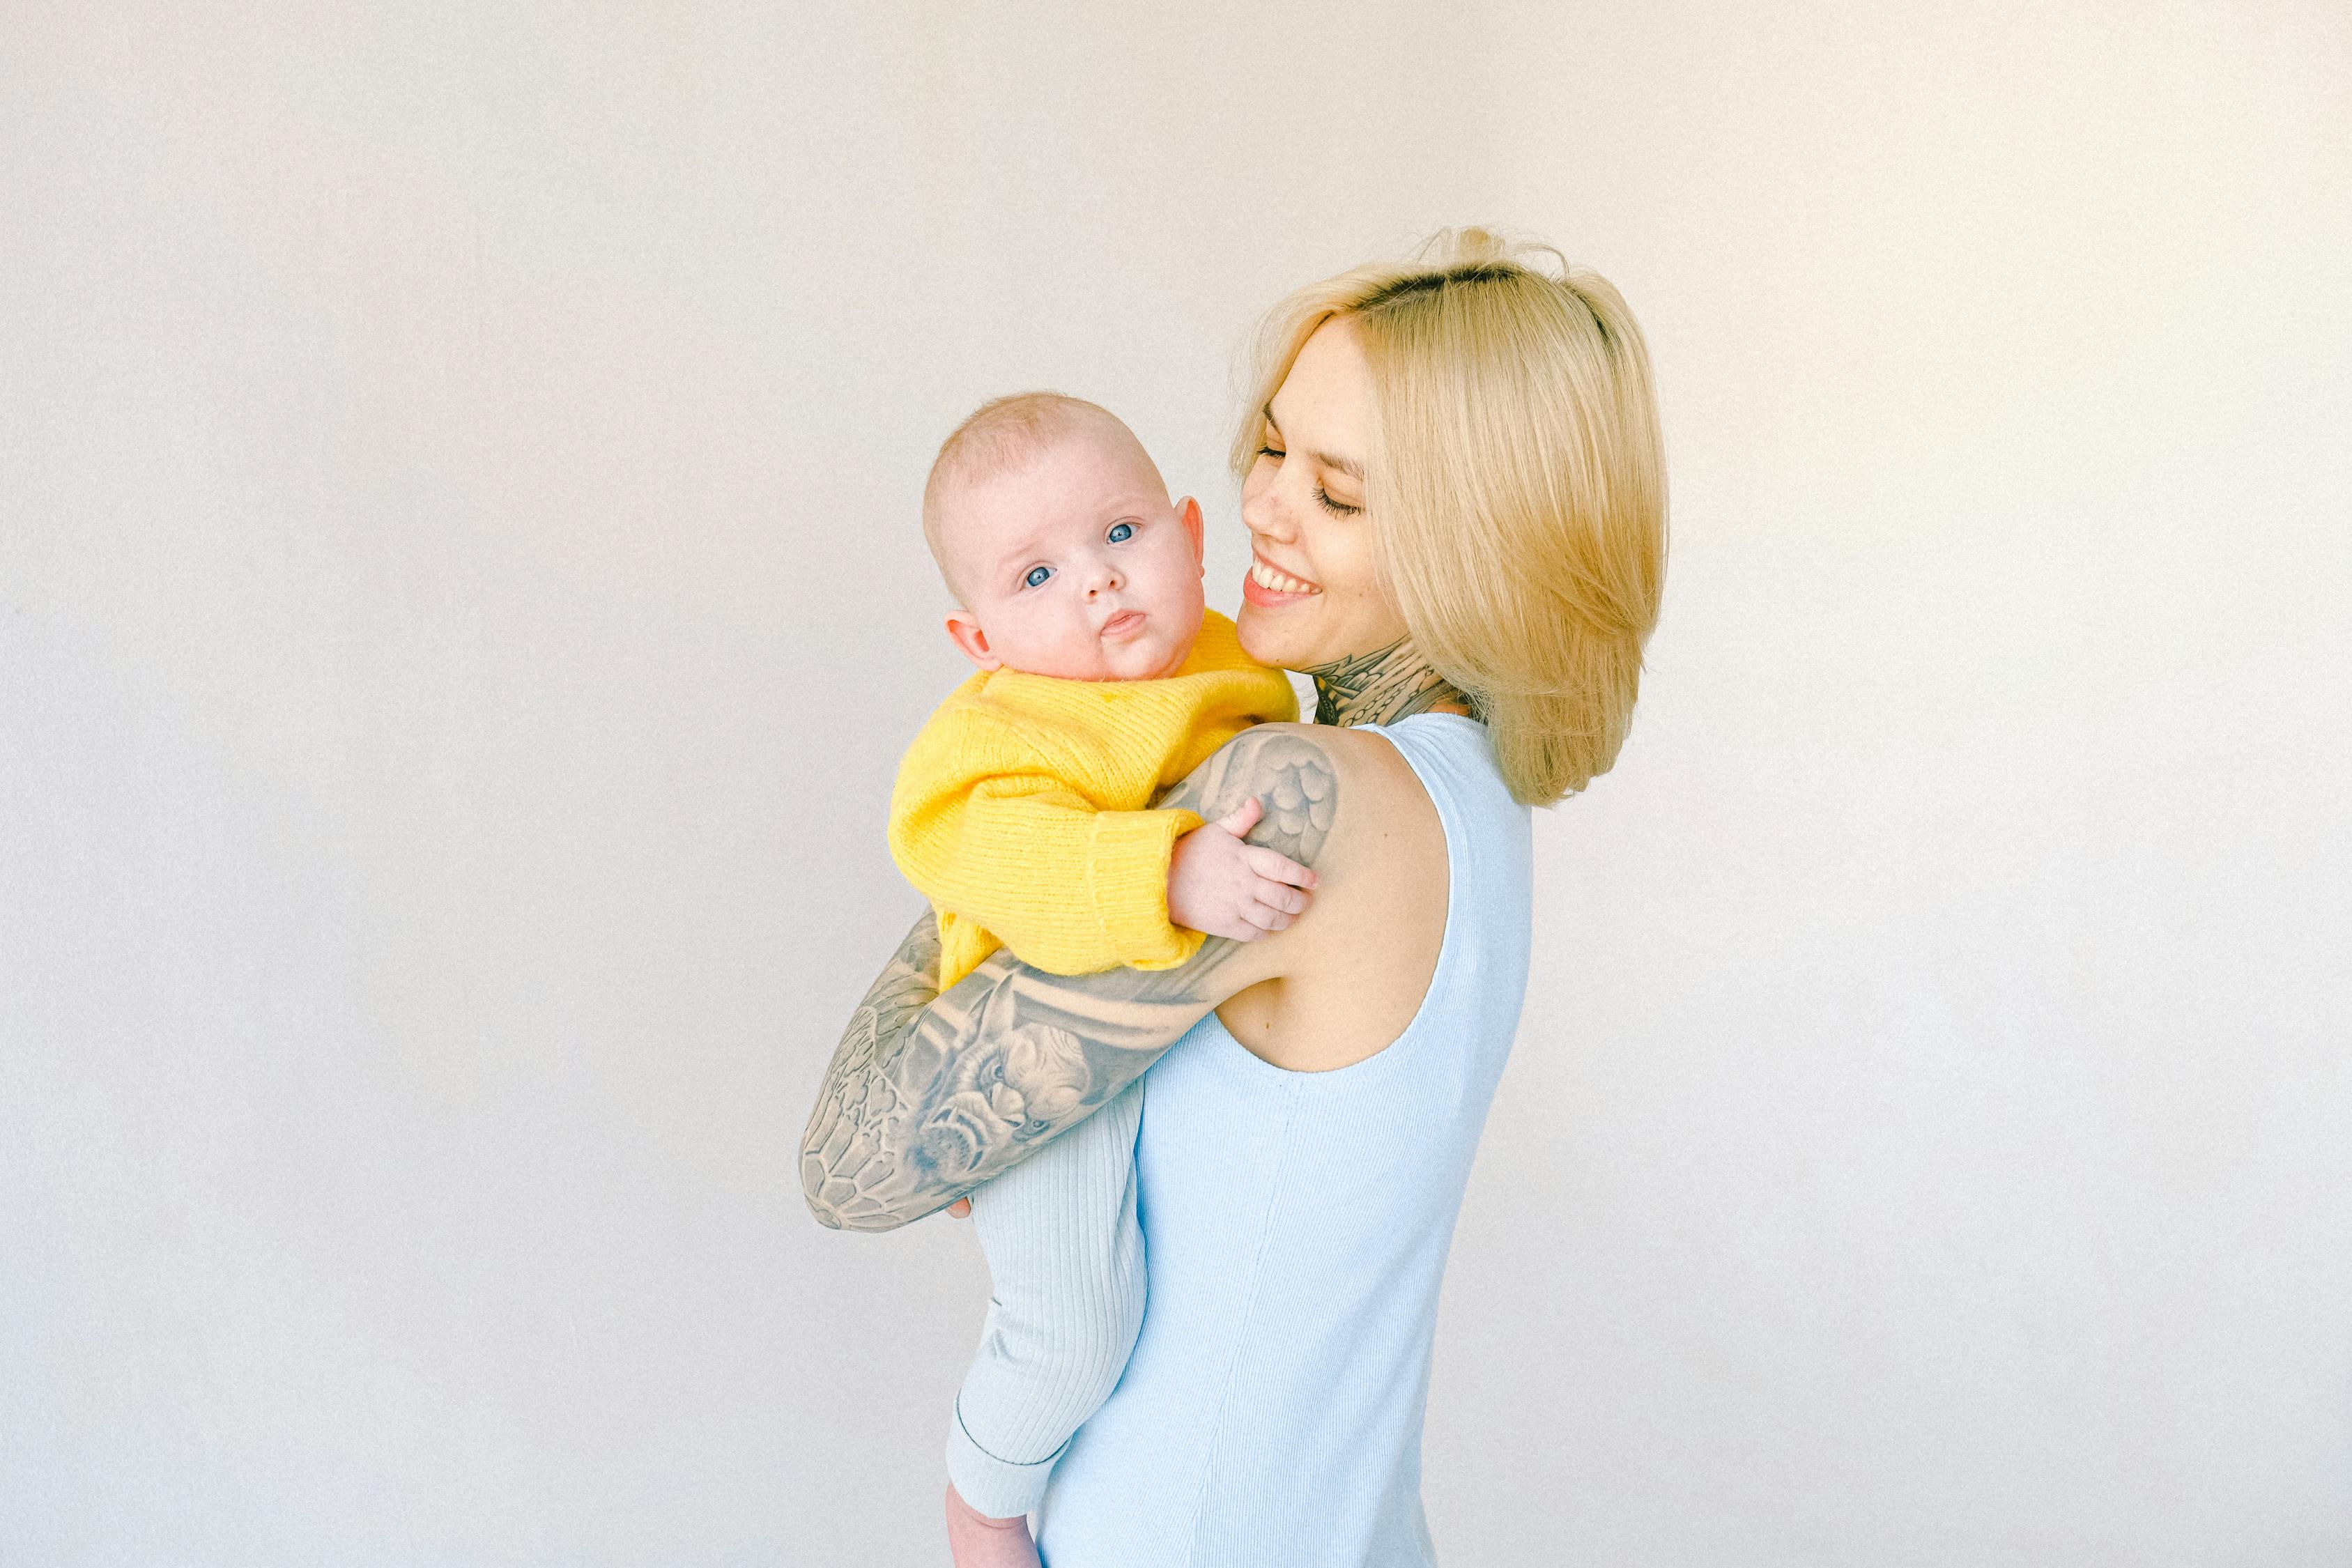 Cheerful tattooed female hugging little baby in arms against gray background